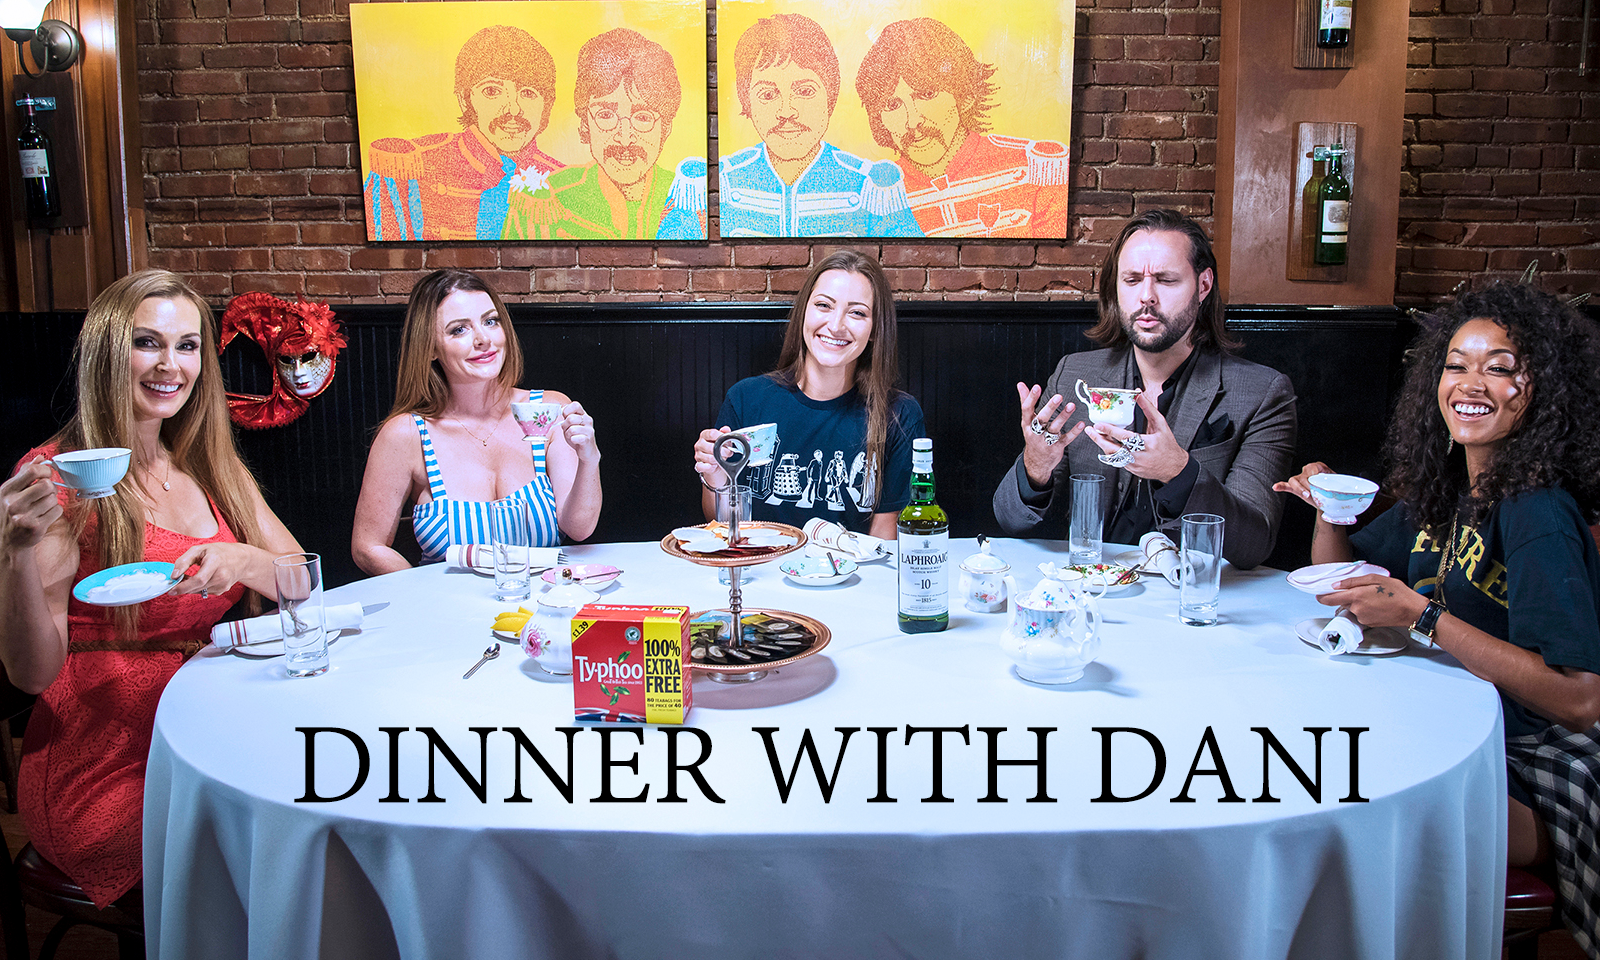 Season Finale of ‘Dinner With Dani’ to Feature Gilbert Gottfried